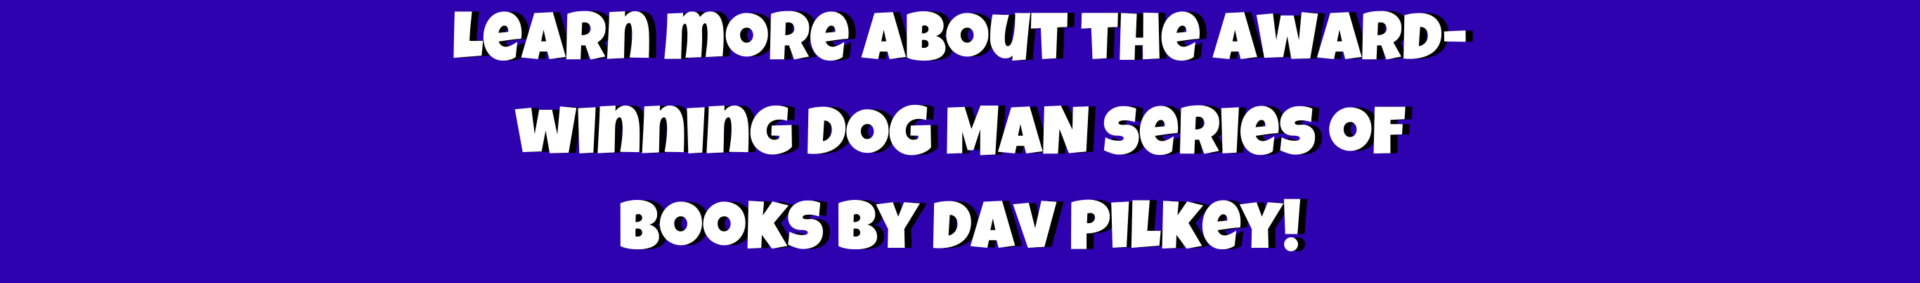 Learn More about the award-winning Dog Man Series of books by David Pilkey!